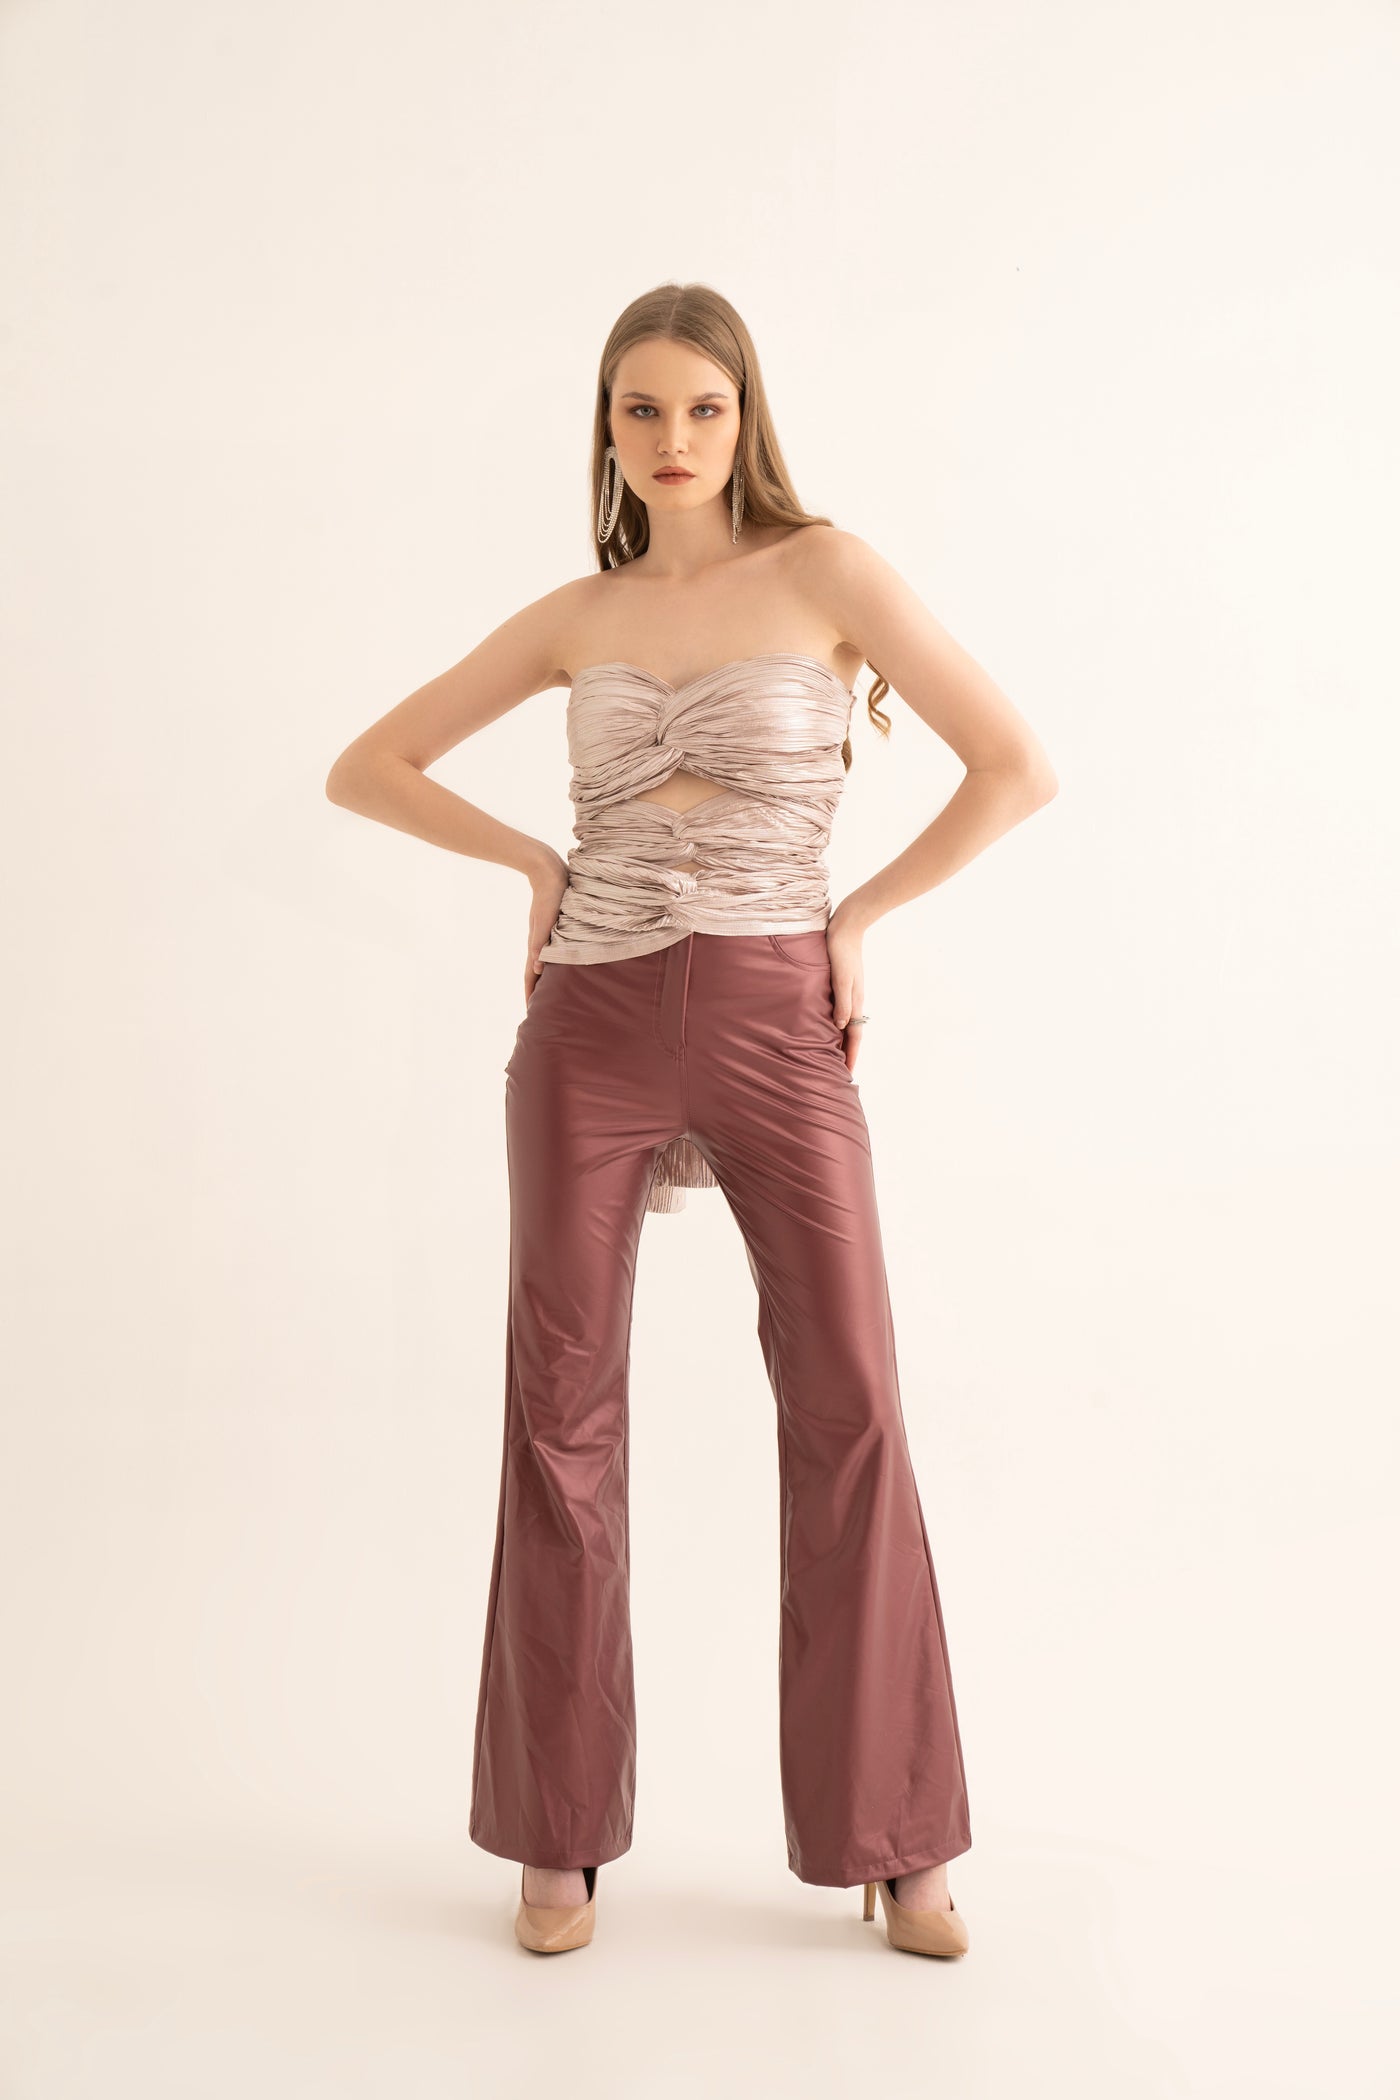 Metallic Rose Cut Out Tube Top and Cherry Red Leather Flared Pants Co-ord